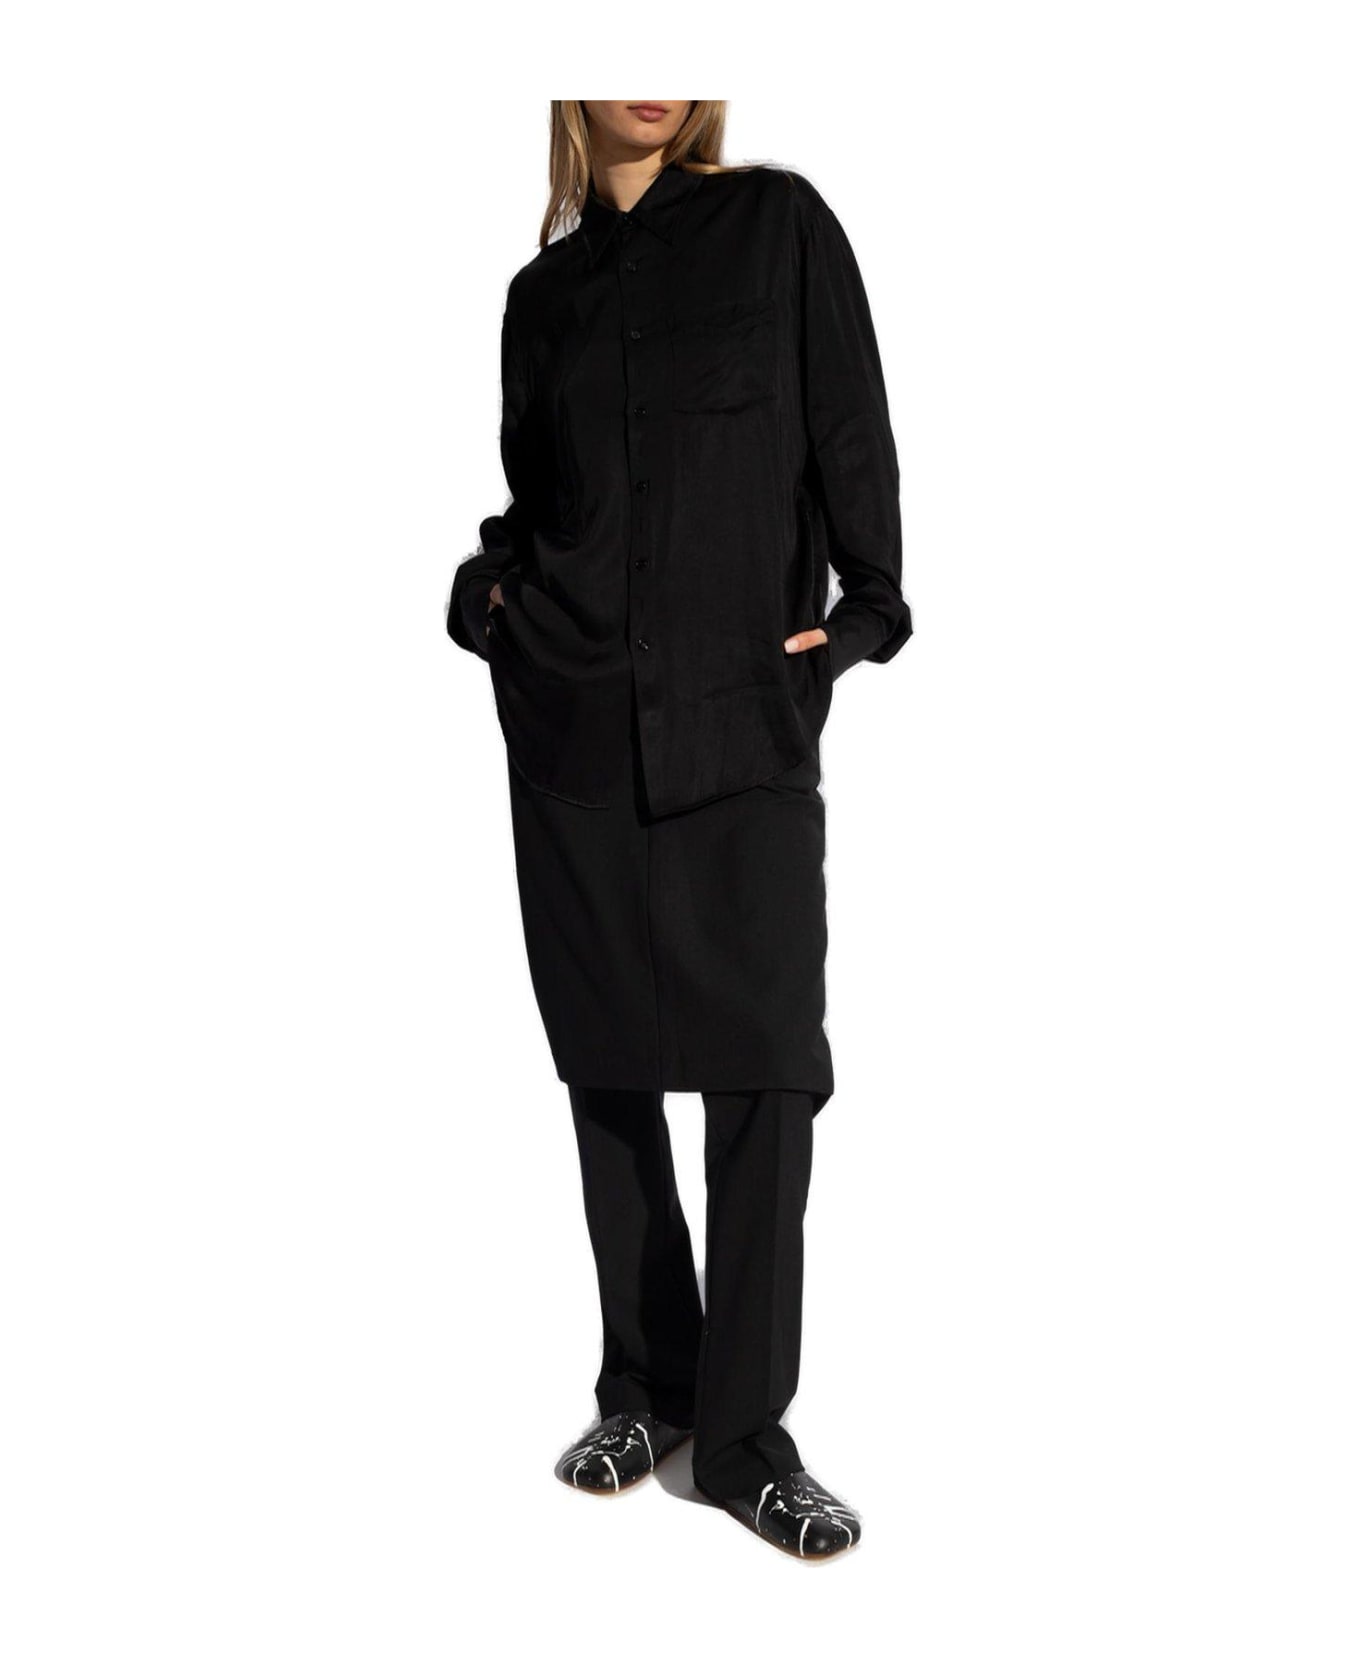 MM6 Maison Margiela Lining Look Two-way Button-up Shirt